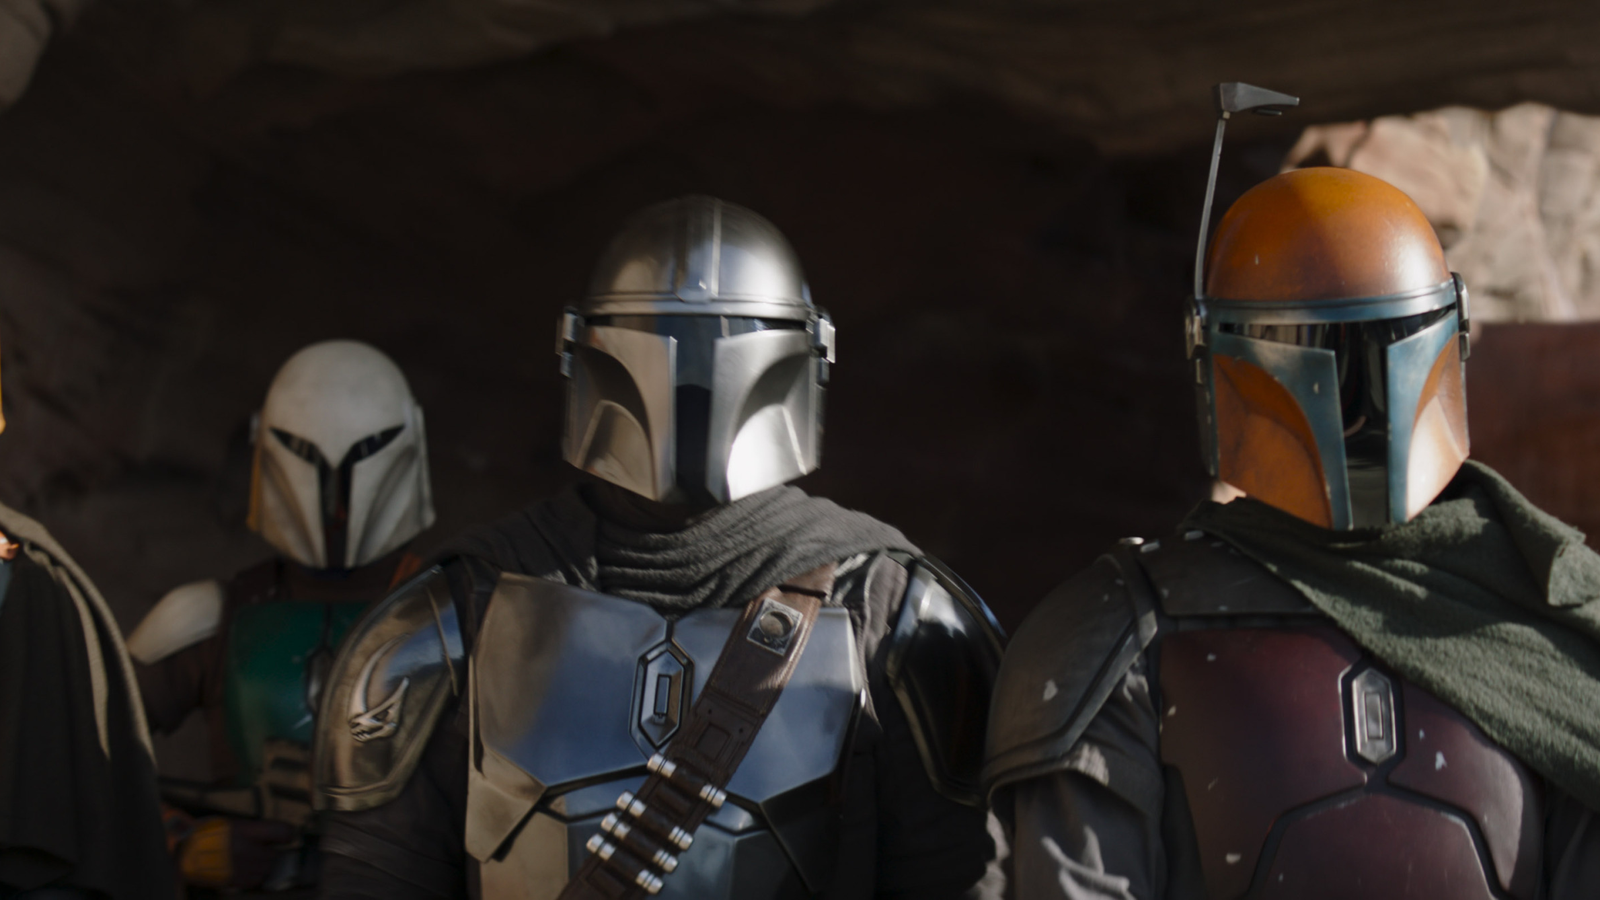 Where does The Mandalorian season 3 take place in the Star Wars timeline?